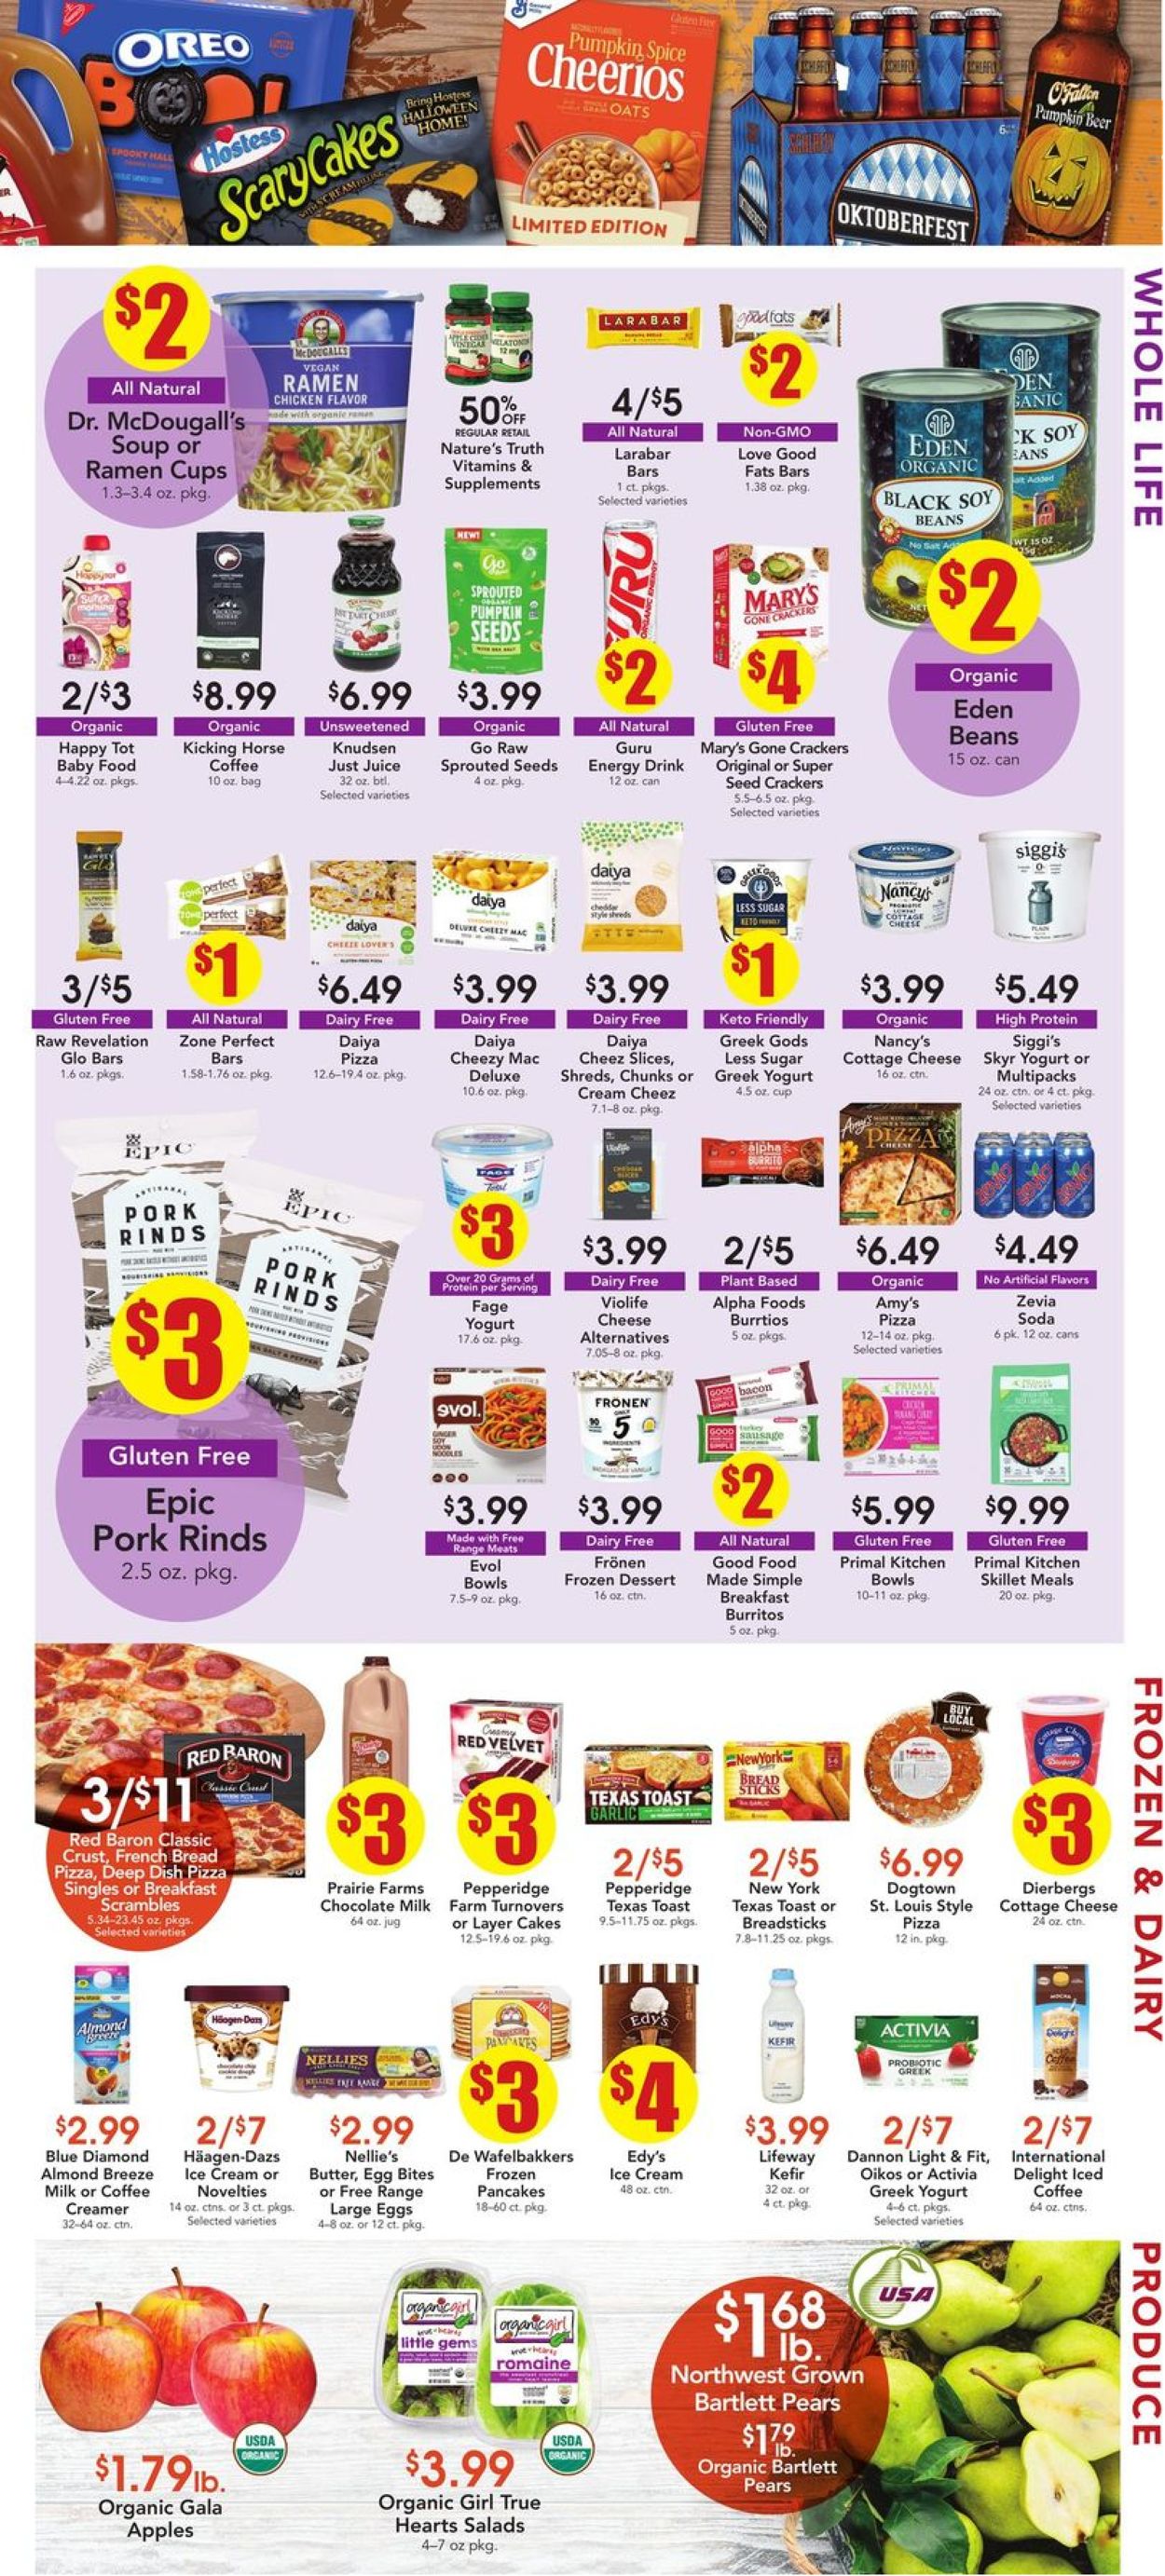 Catalogue Dierbergs from 09/14/2021